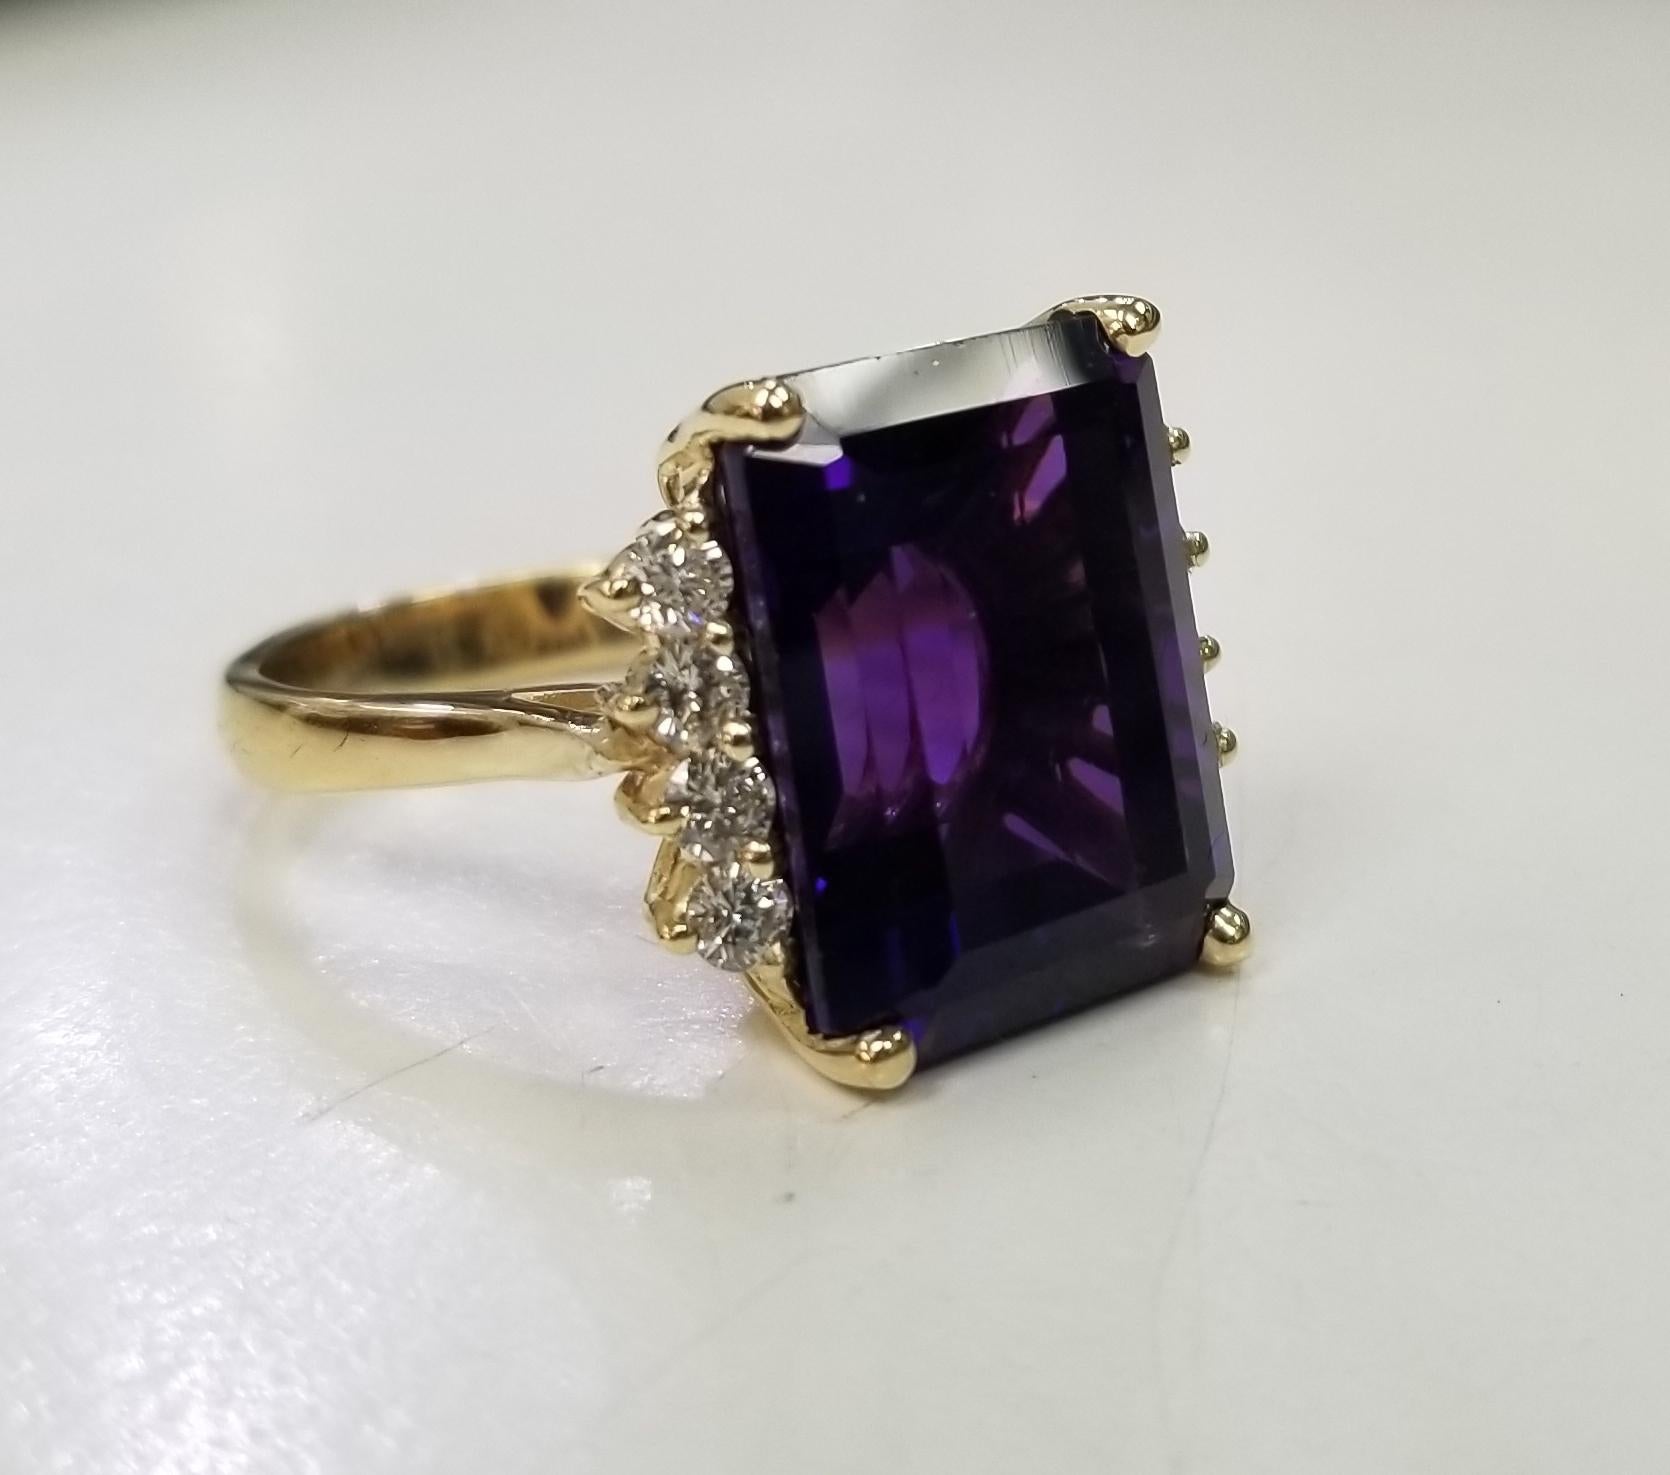 14k yellow gold amethyst and diamond ring, containing 1 emerald cut  weighing 13.55cts. and 8 round diamonds weighing .55pts.  This ring is a size 5.75 but we will size to fit for free.